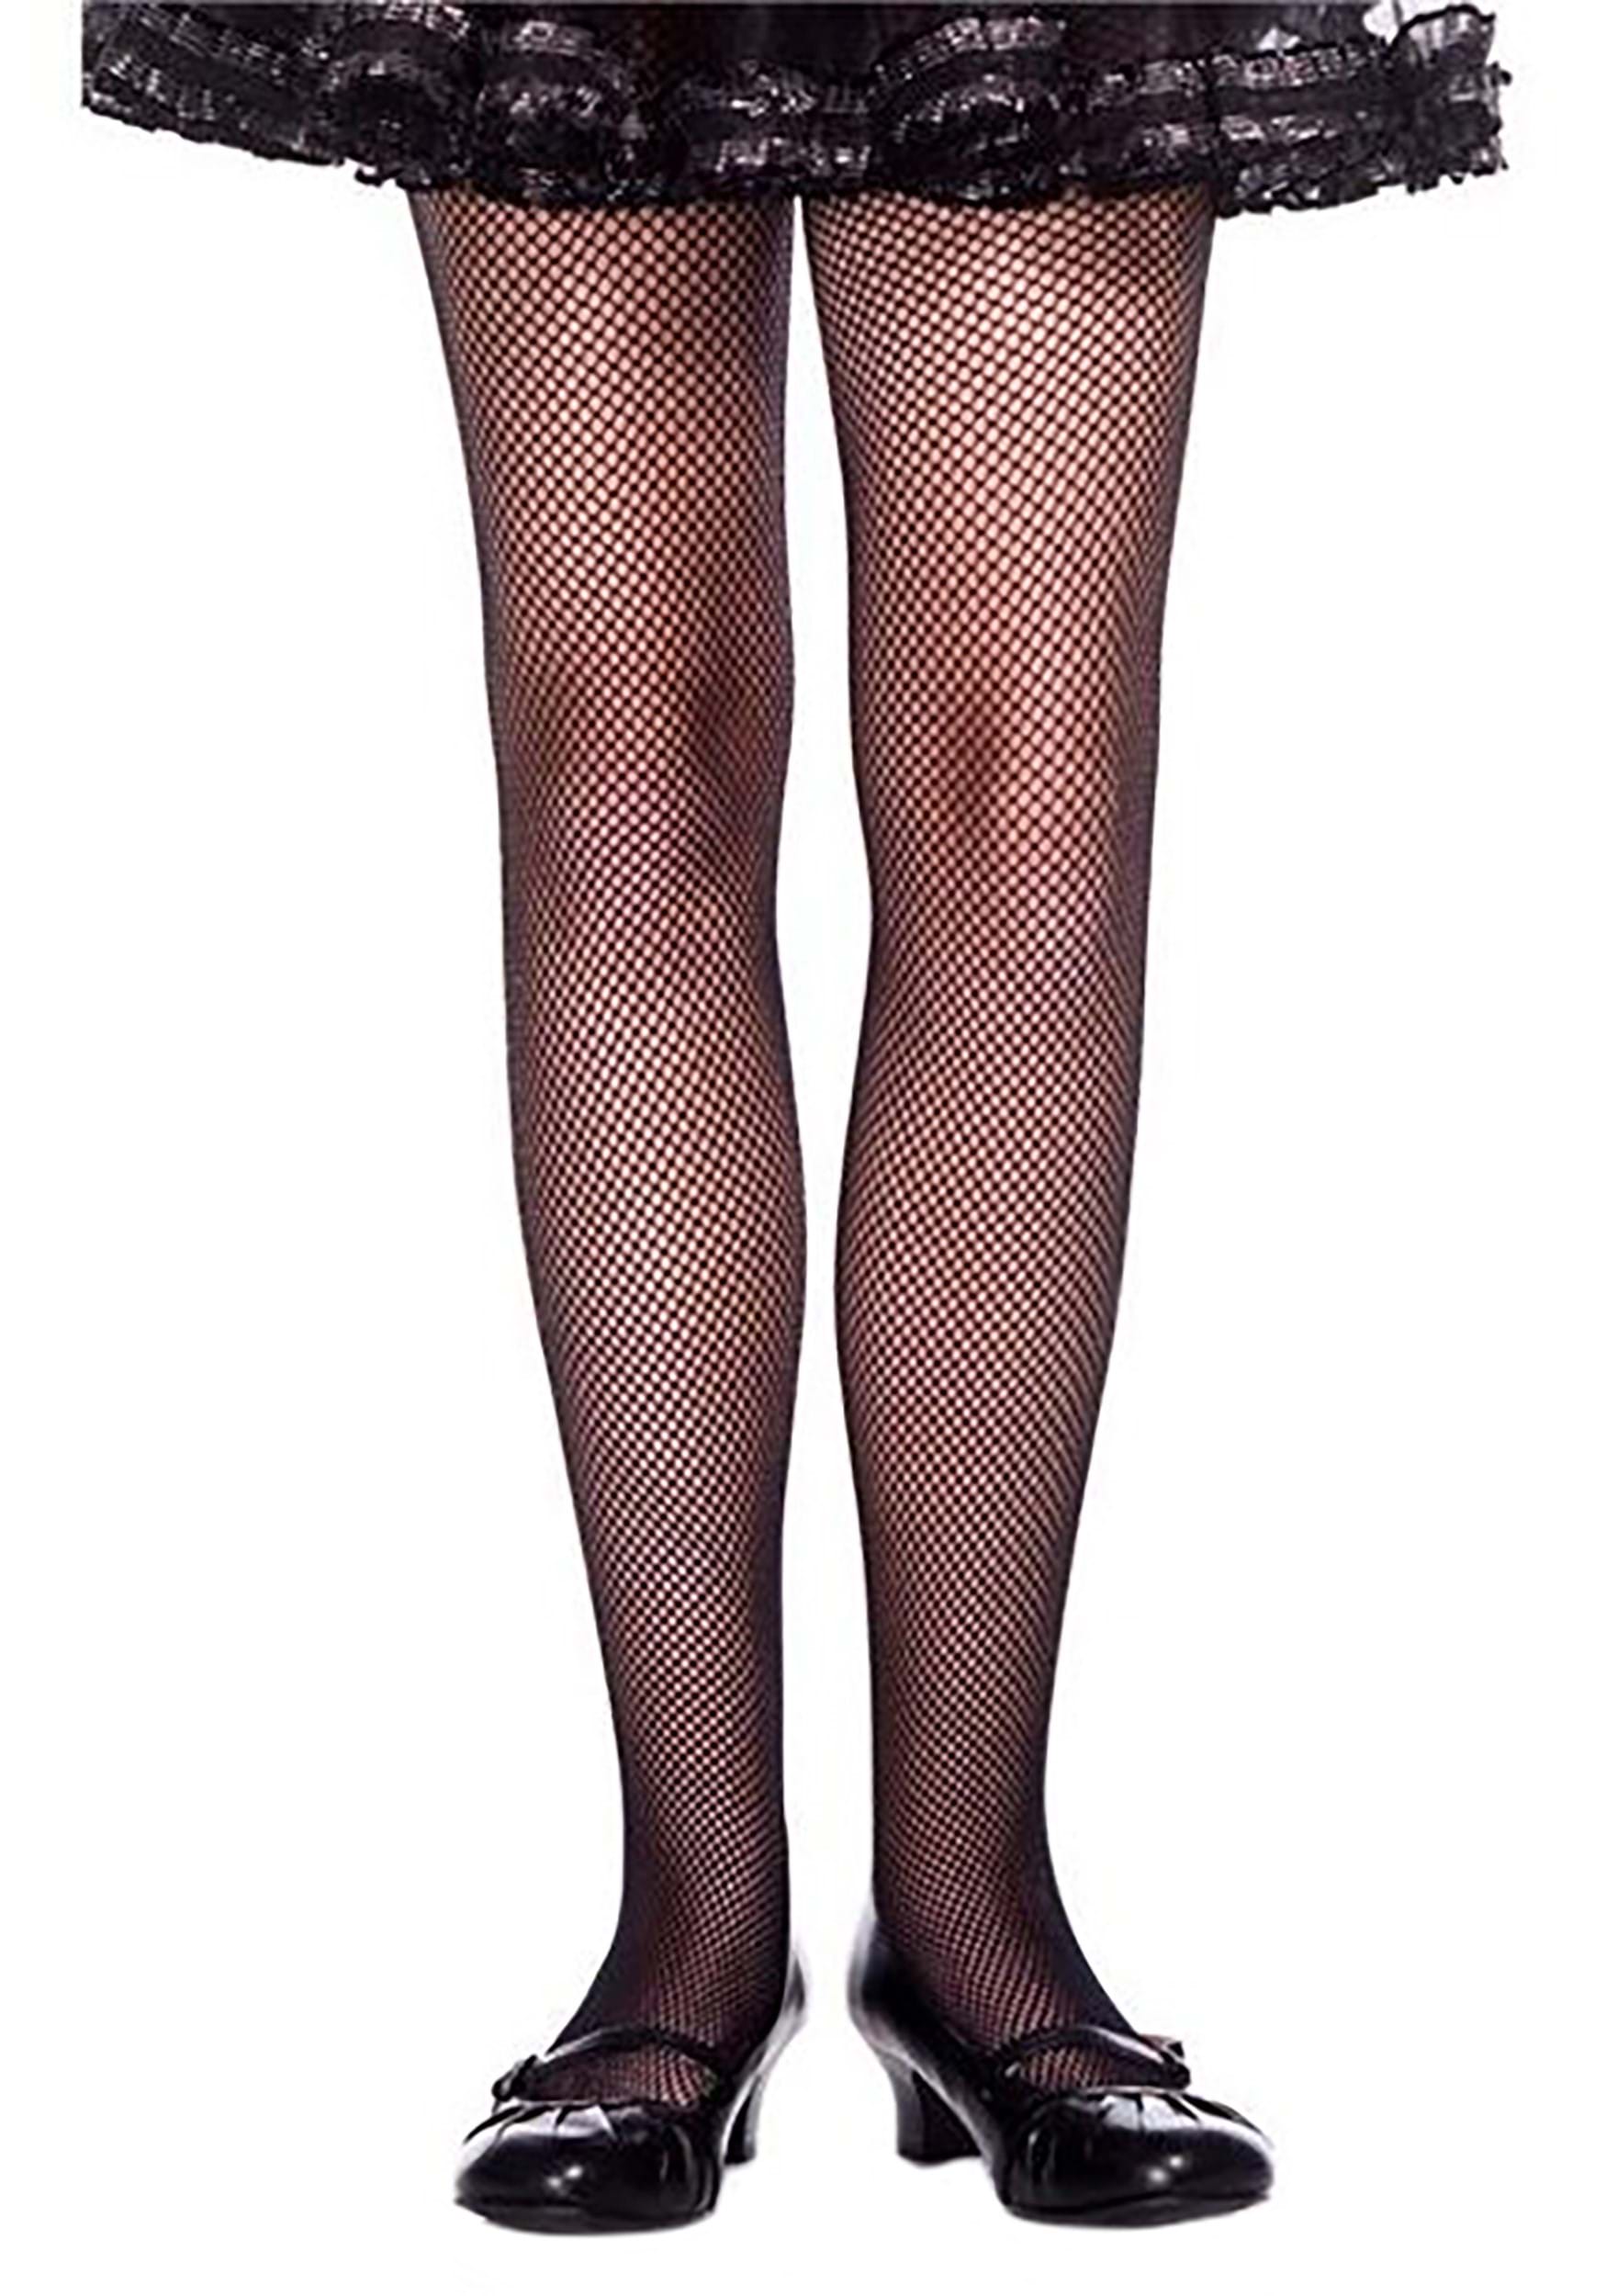 DOTTED MESH TIGHTS - Black